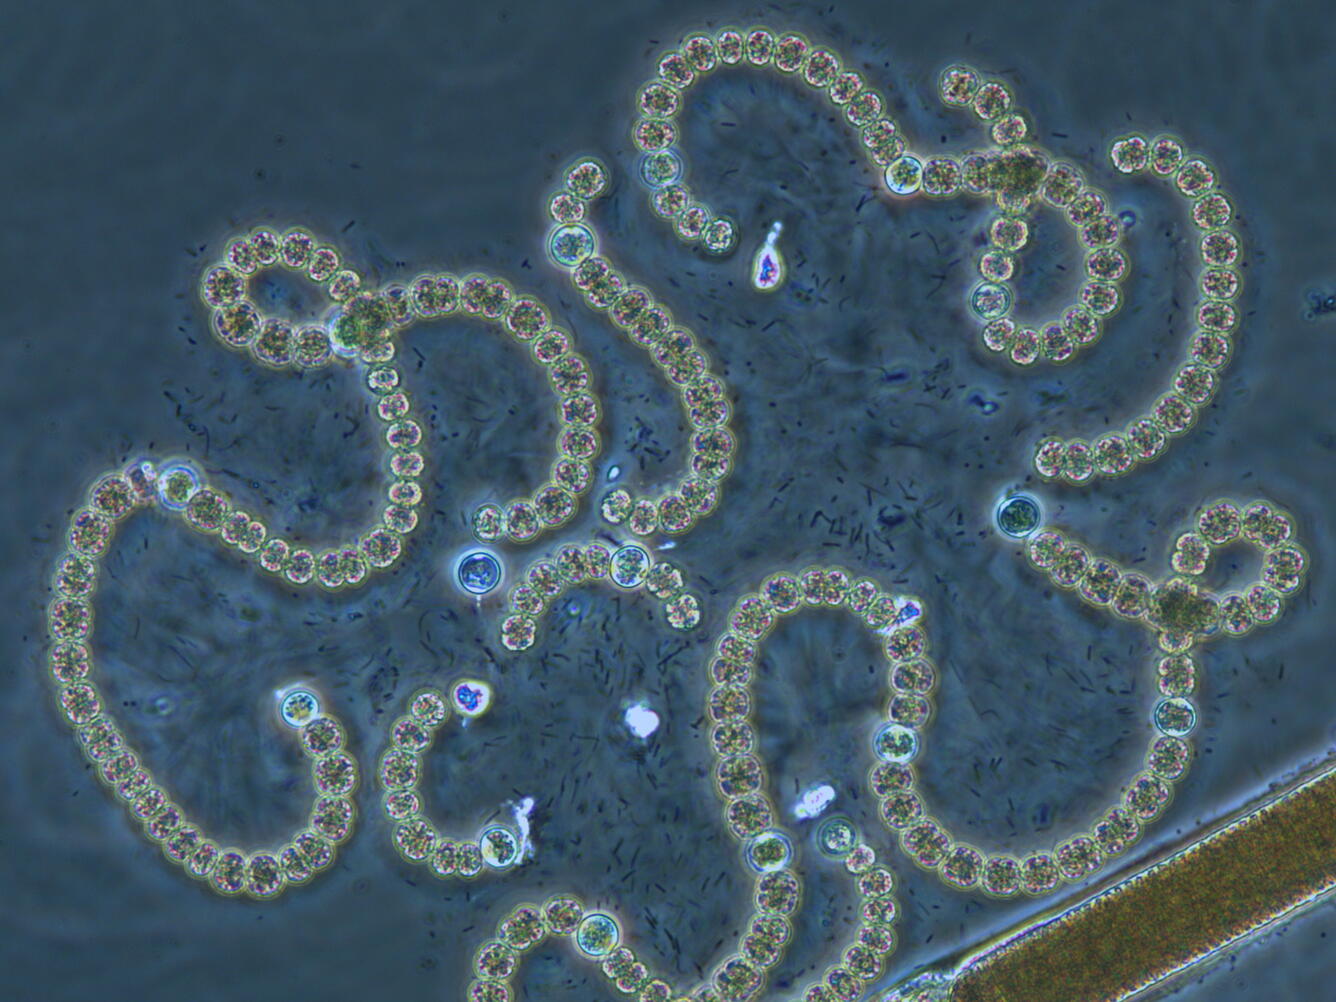 Microscopic photograph of the cyanobacteria Dolichospermum circinale cells in curved filaments